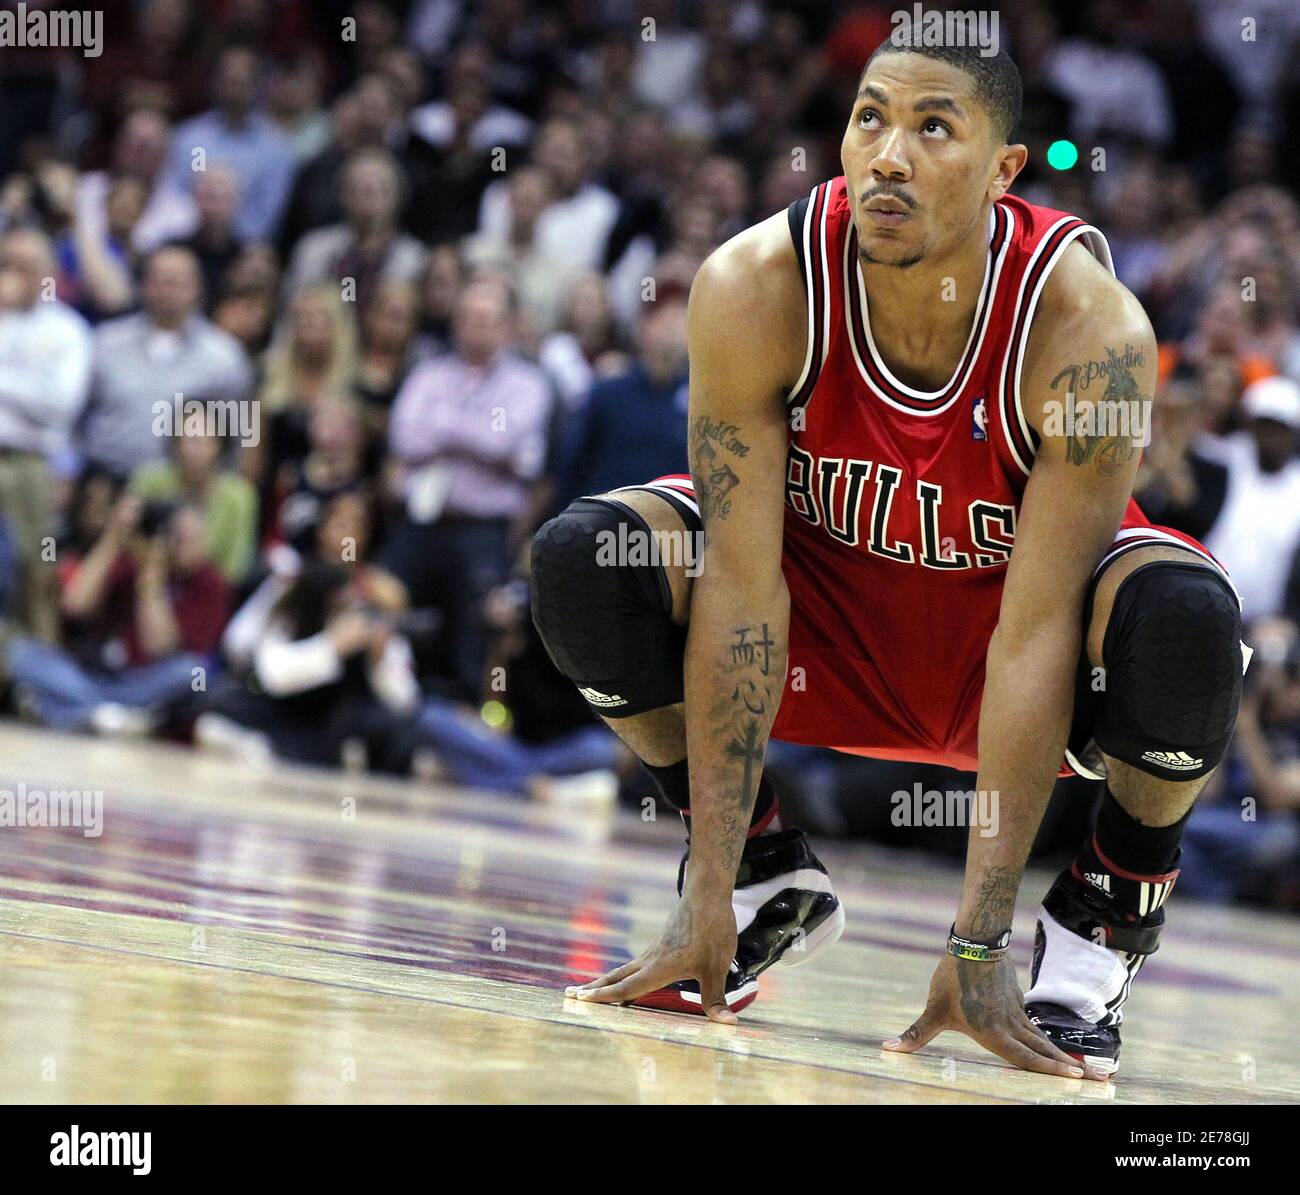 Chicago Bulls Derrick Rose squats down at midcourt during the last seconds  of fourth quarter of Game 5 of their NBA Eastern Conference playoff series  against the Cleveland Cavaliers in Cleveland, April